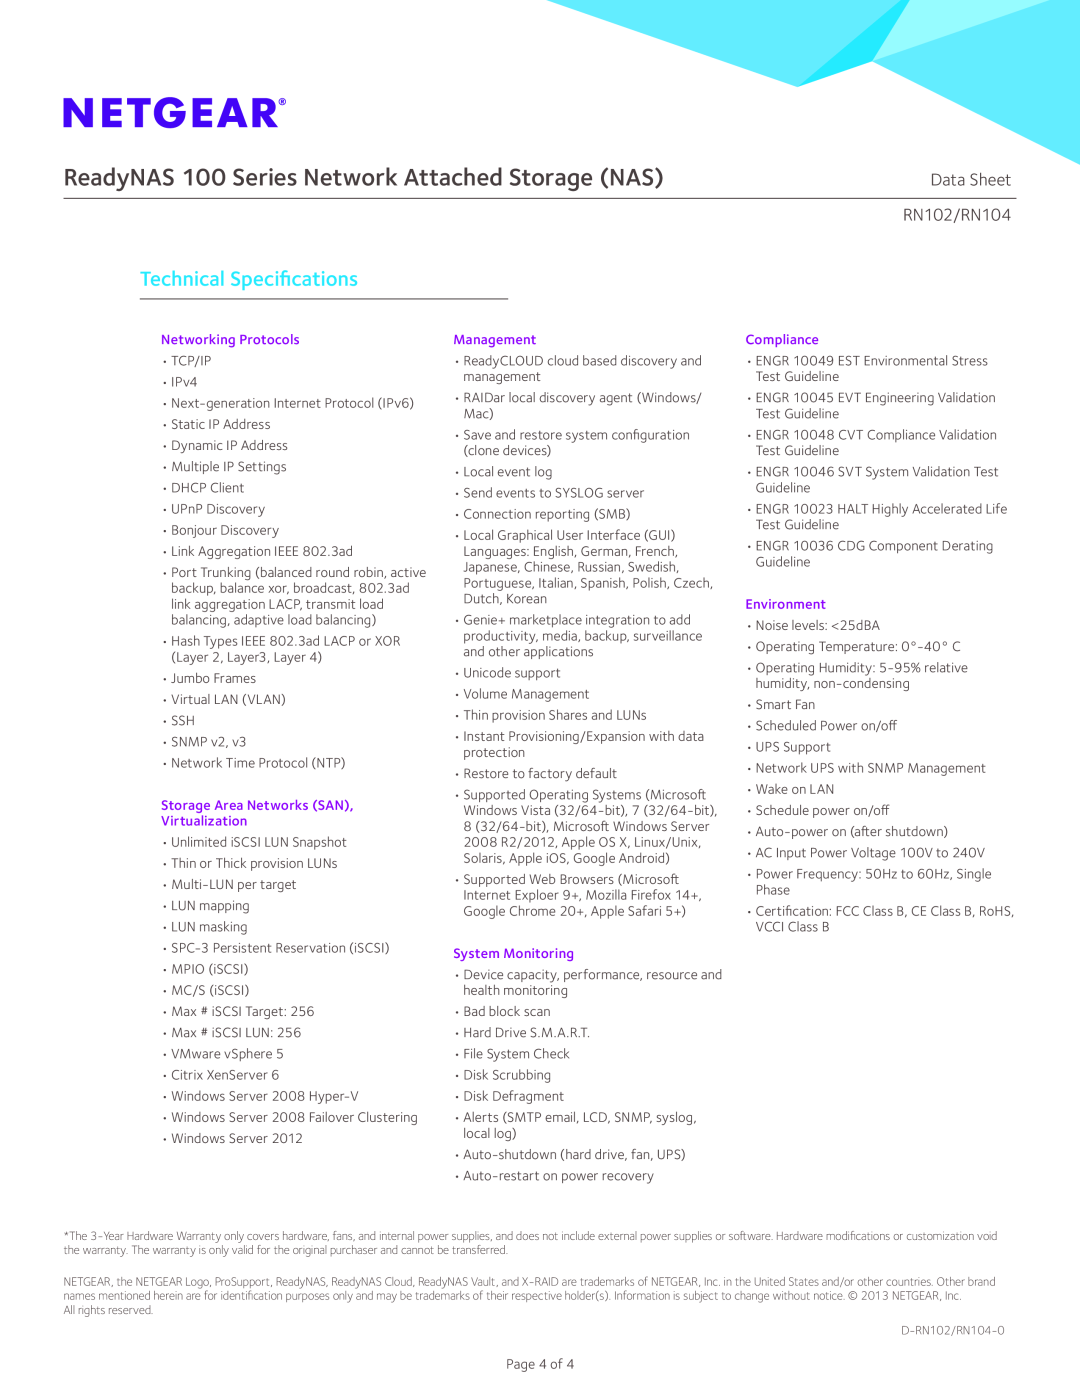 NETGEAR RN10200-100NAS ReadyNAS 100 Series Network Attached Storage NAS, Technical Specifications, Data Sheet, RN102/RN104 